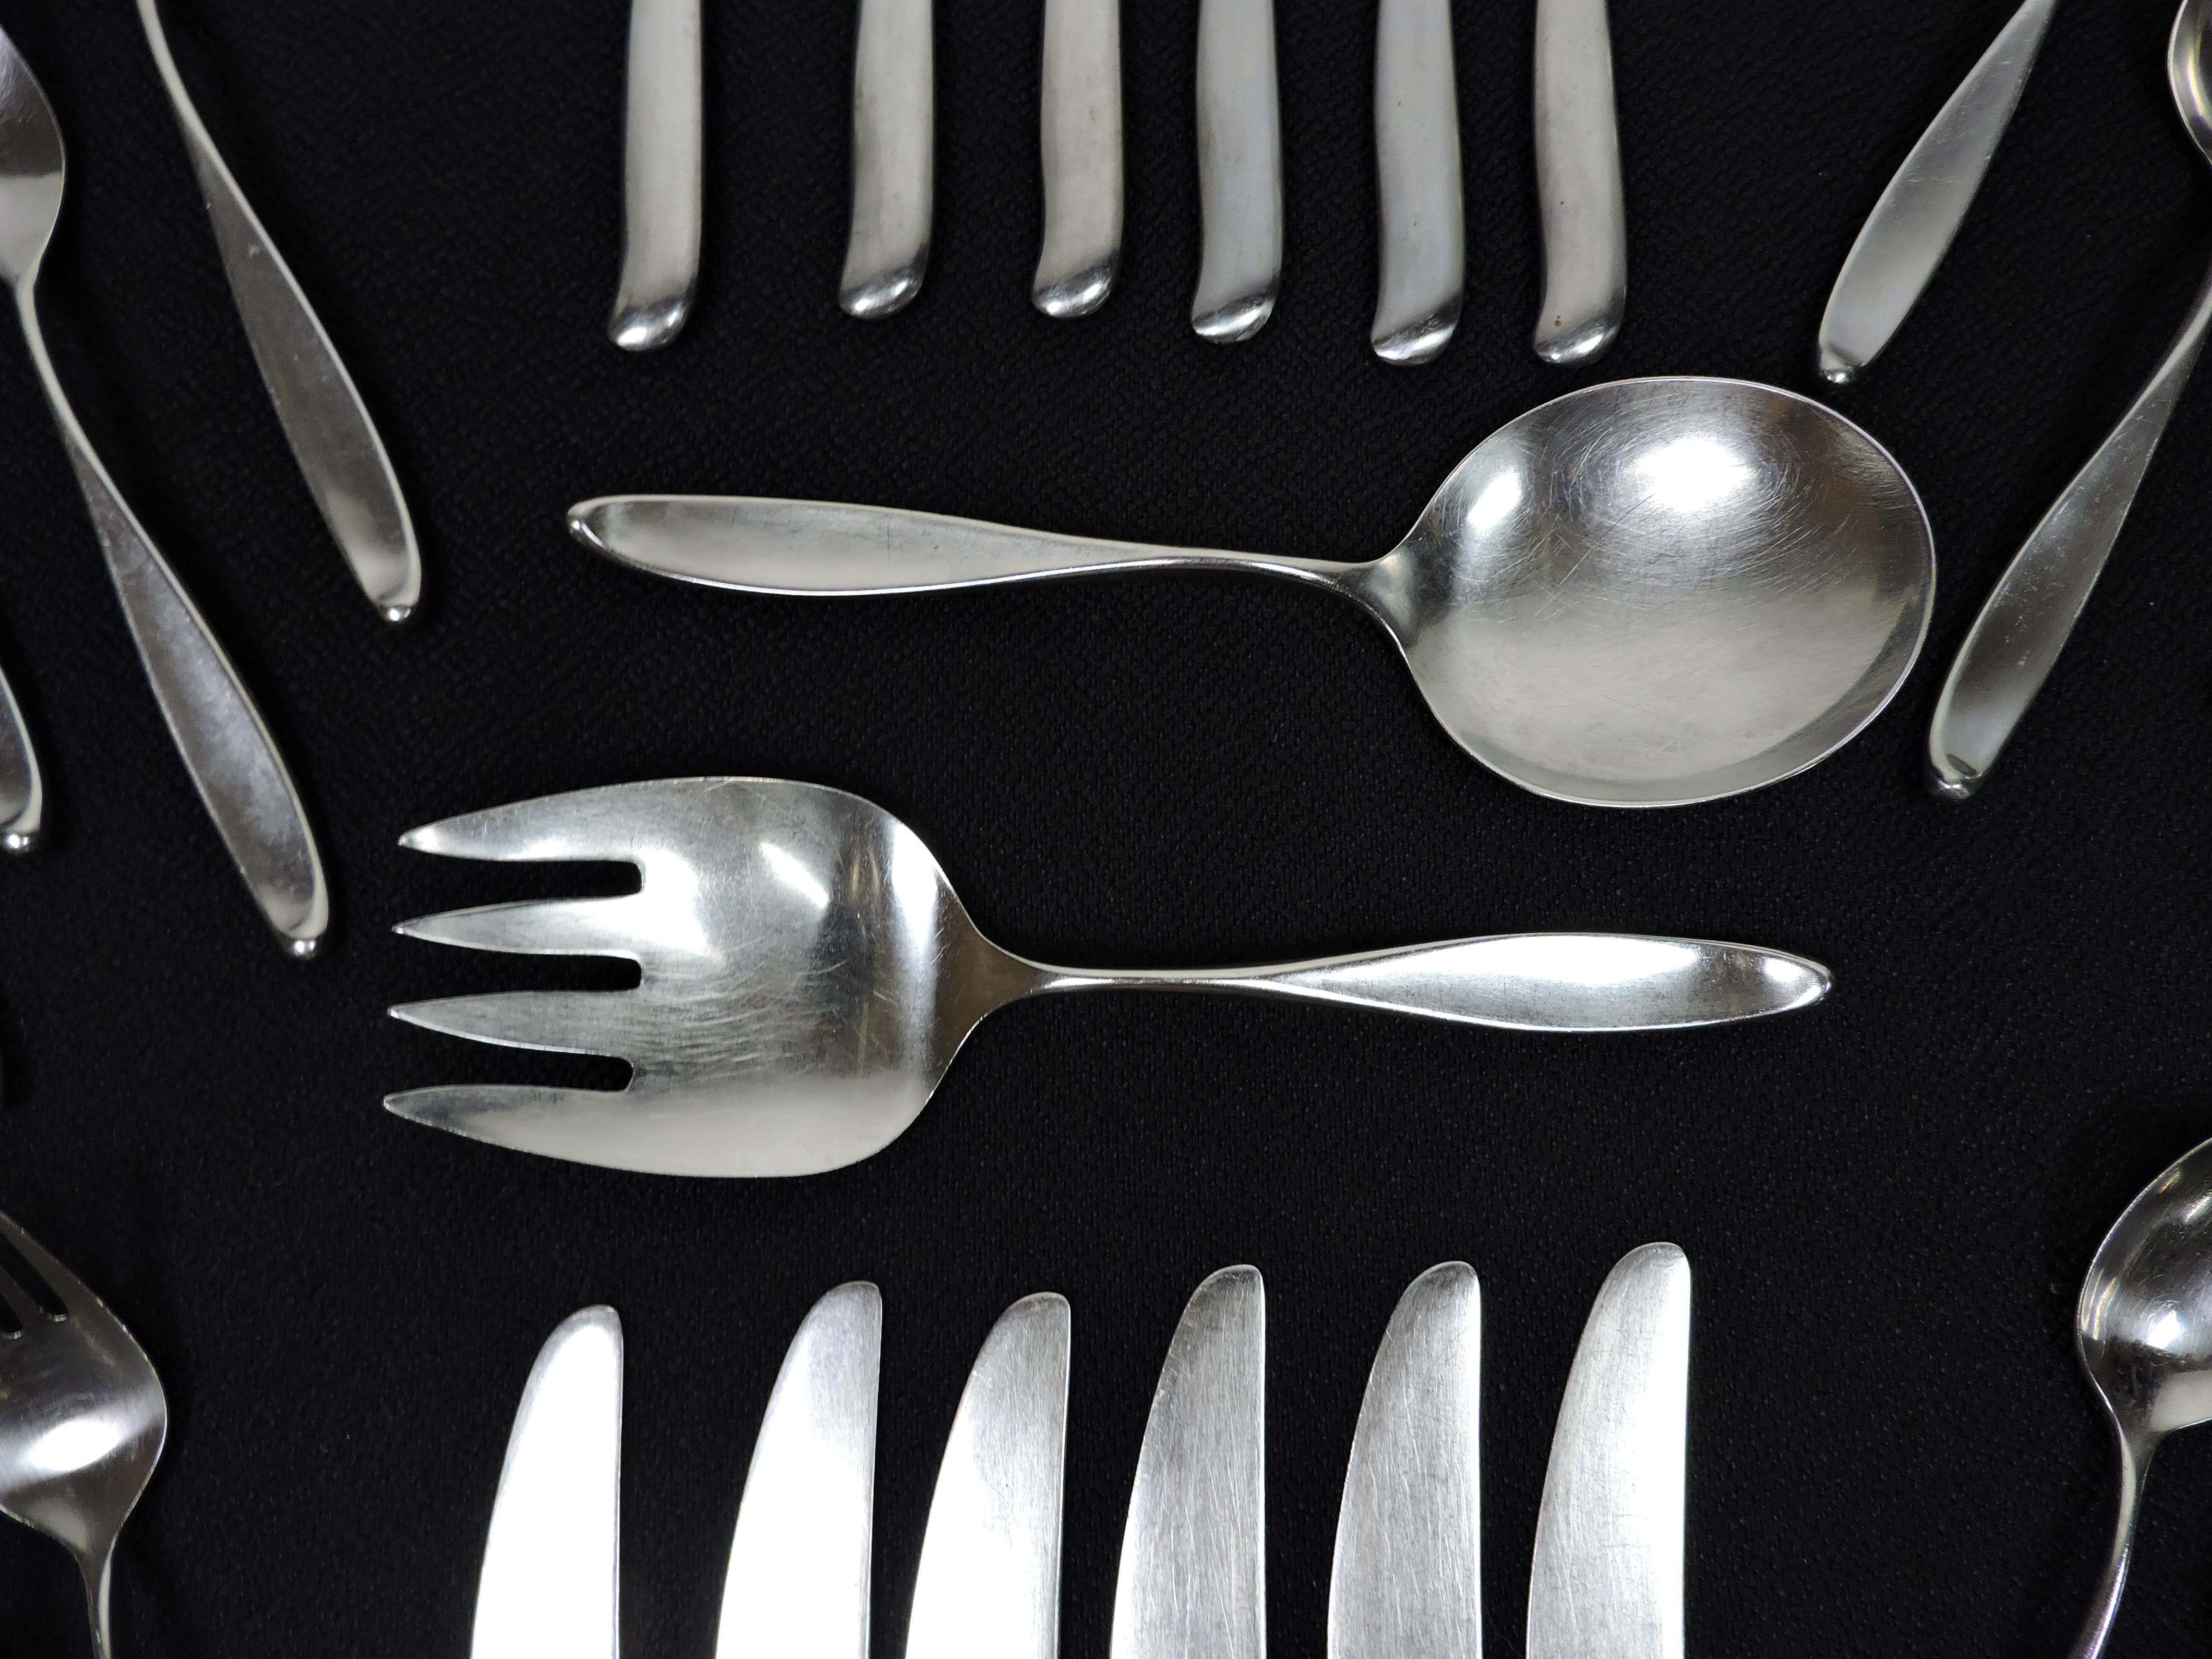 Stainless Steel Lauffer Design 2 Don Wallance Service for 6 Stainless Flatware Germany 38 Pieces For Sale